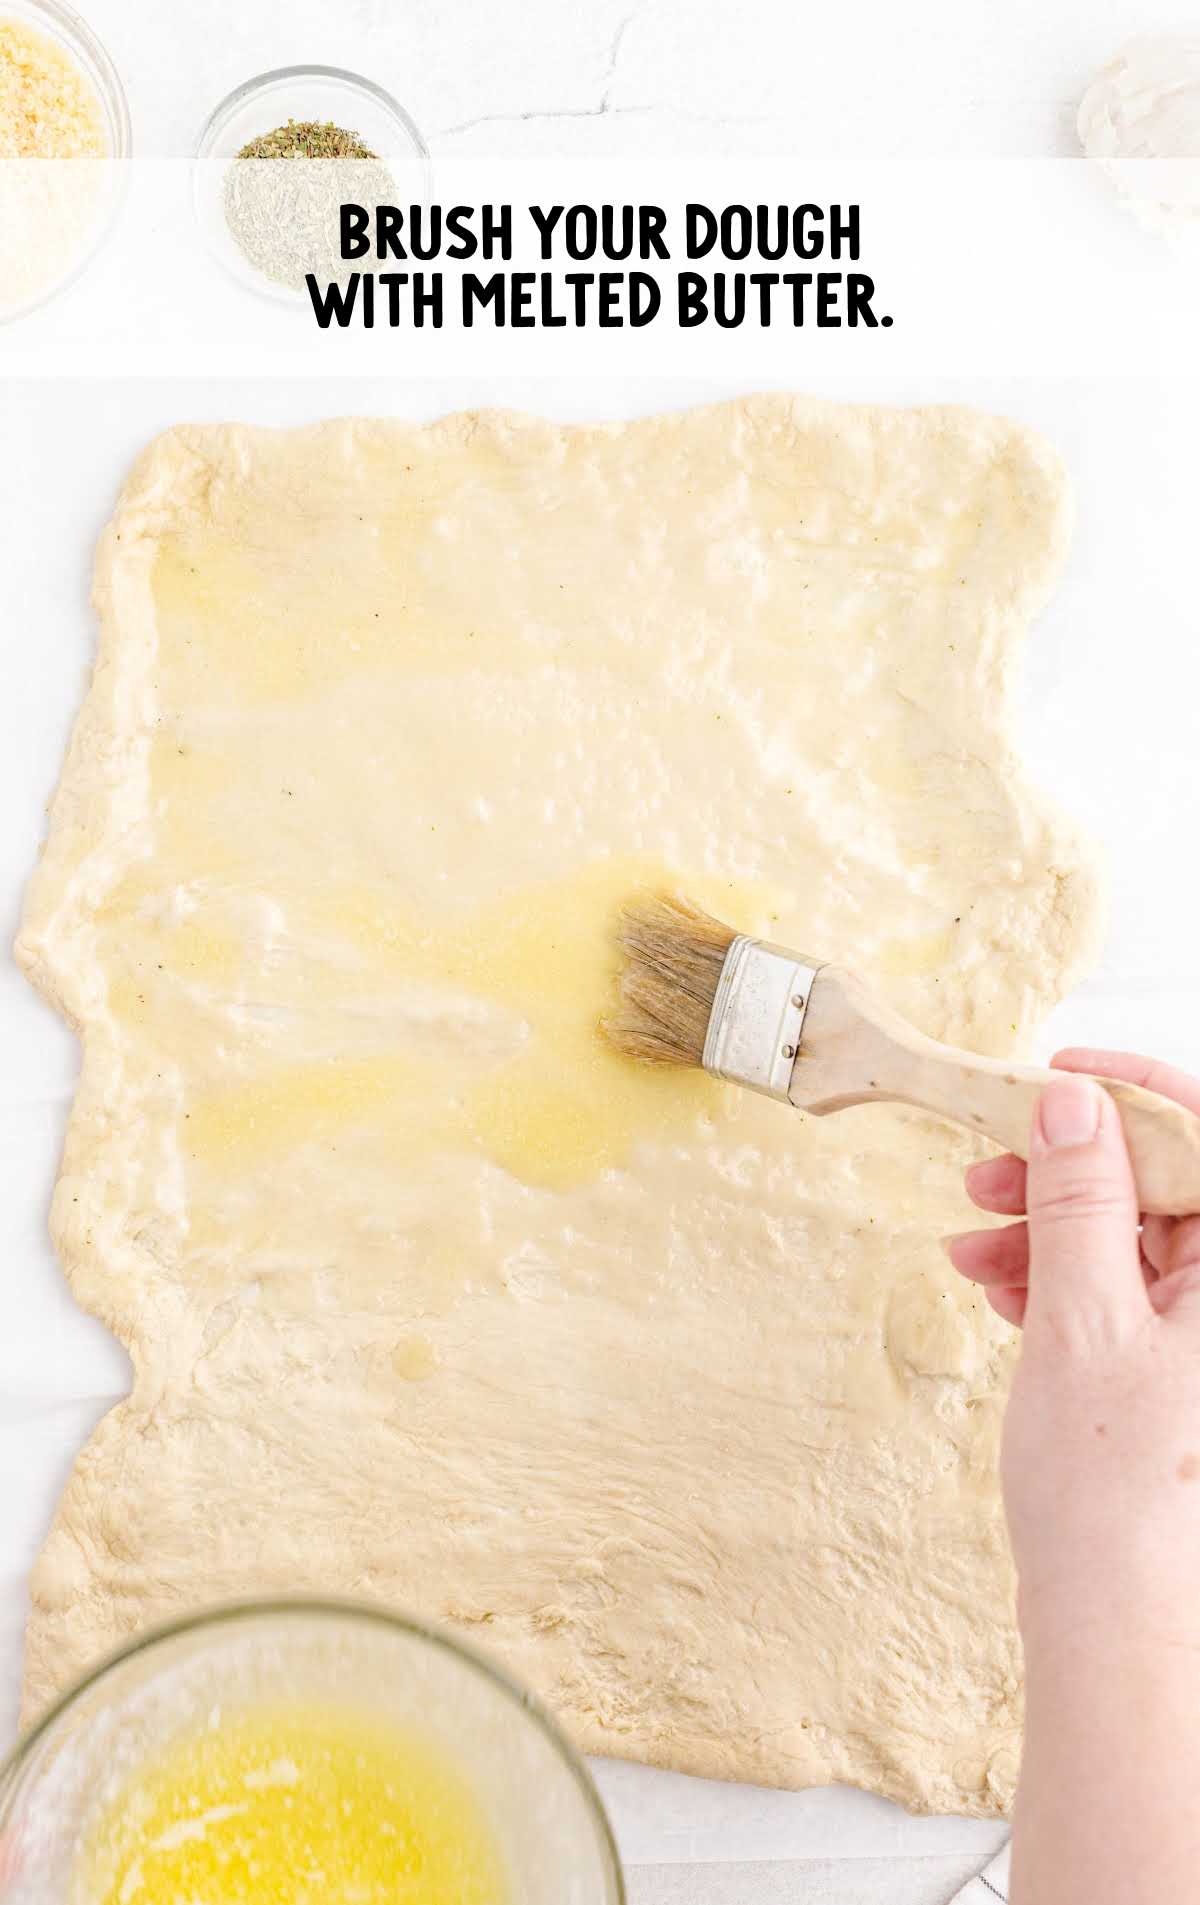 dough being brushed with melted butter